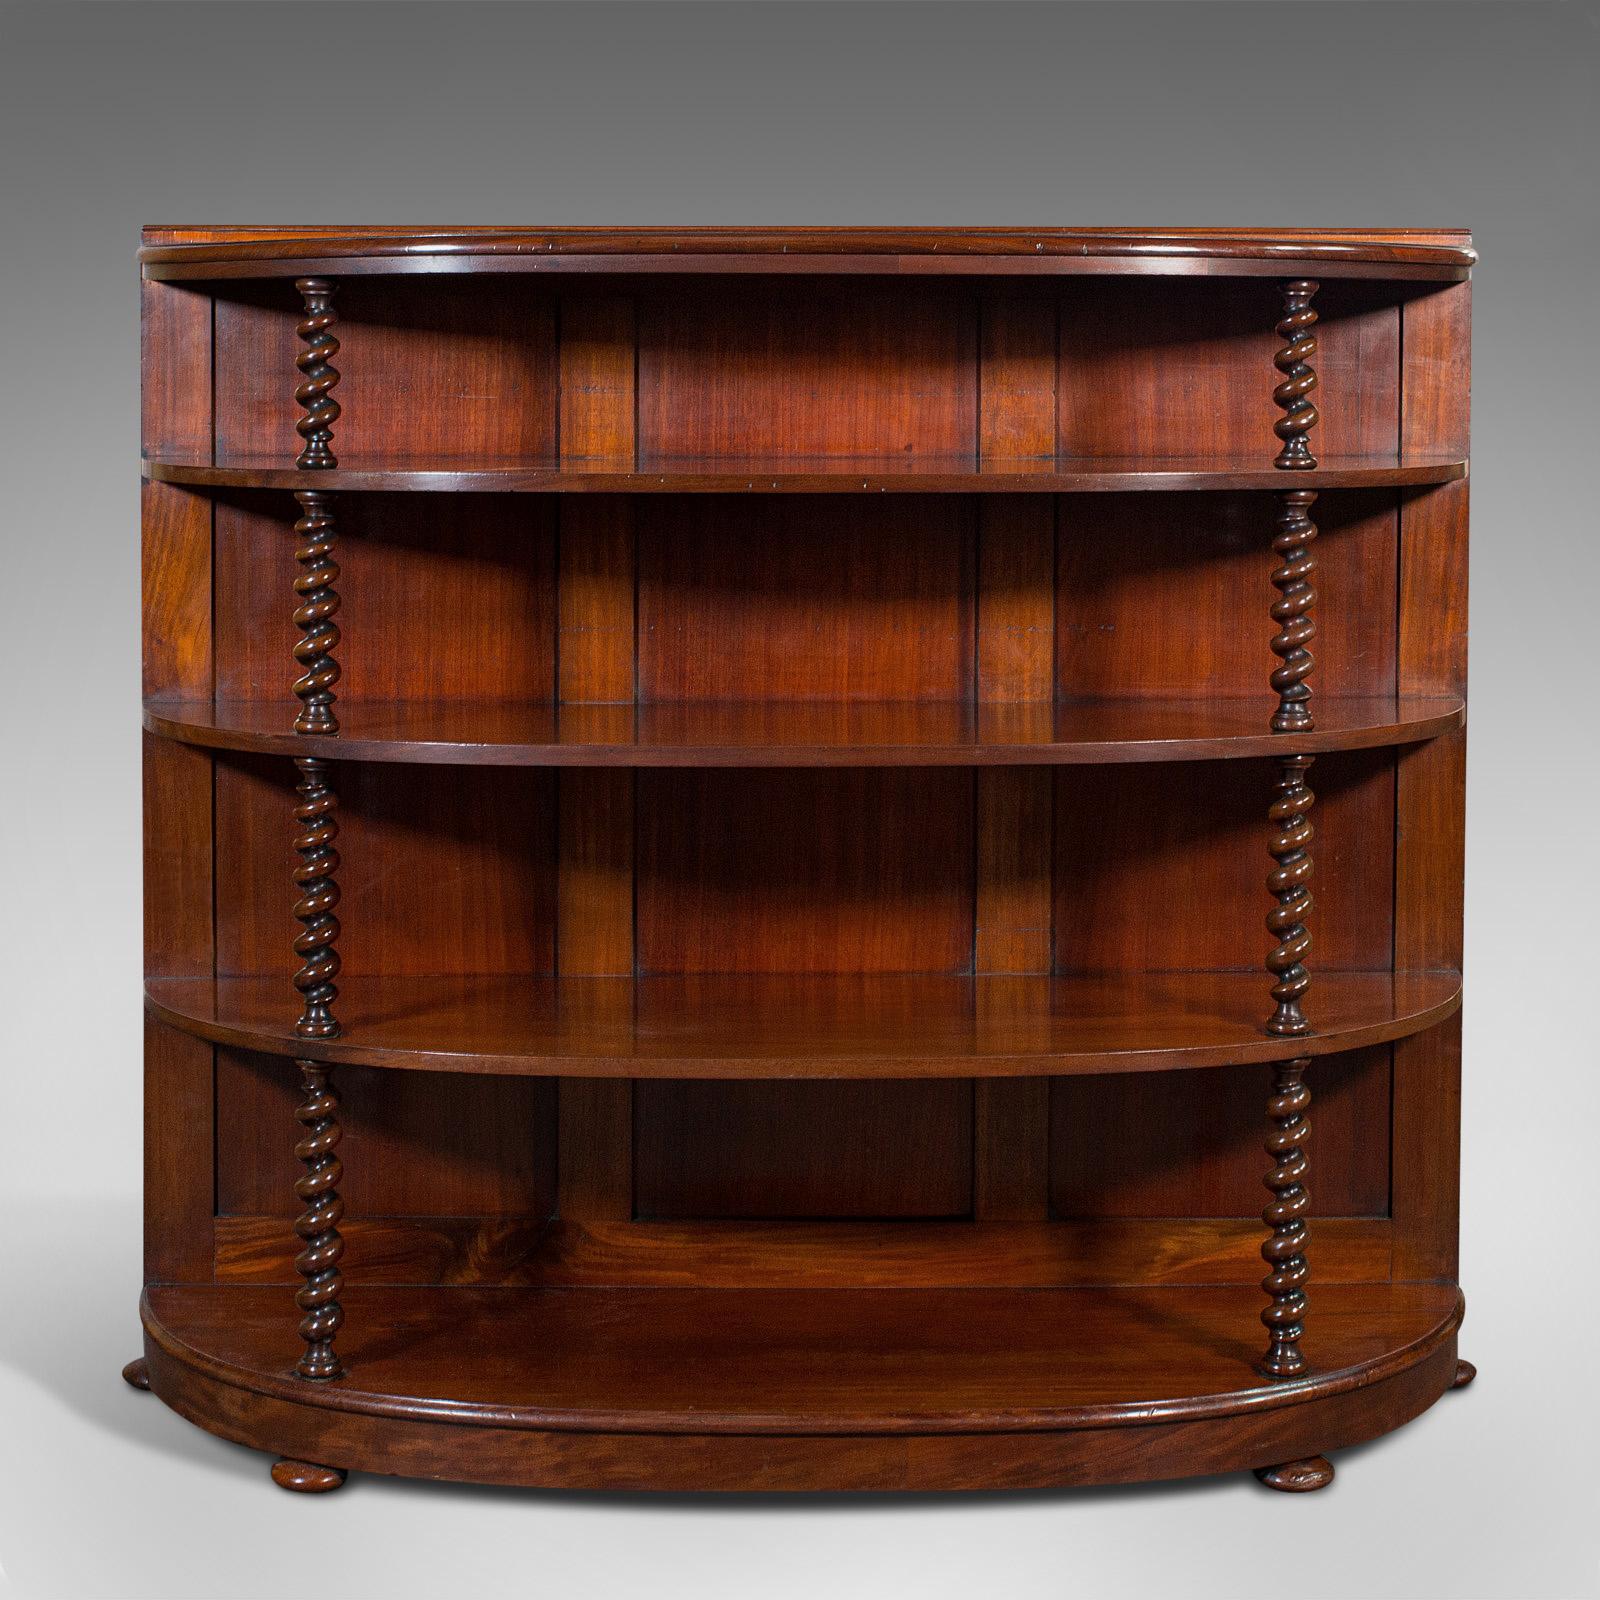 This is an antique boat-tail whatnot bookshelf. An English, mahogany demi-lune bookcase cabinet, dating to the mid Victorian period, circa 1860.

Dashing bow-front form enhanced with delightful colour
Displaying a desirable aged patina